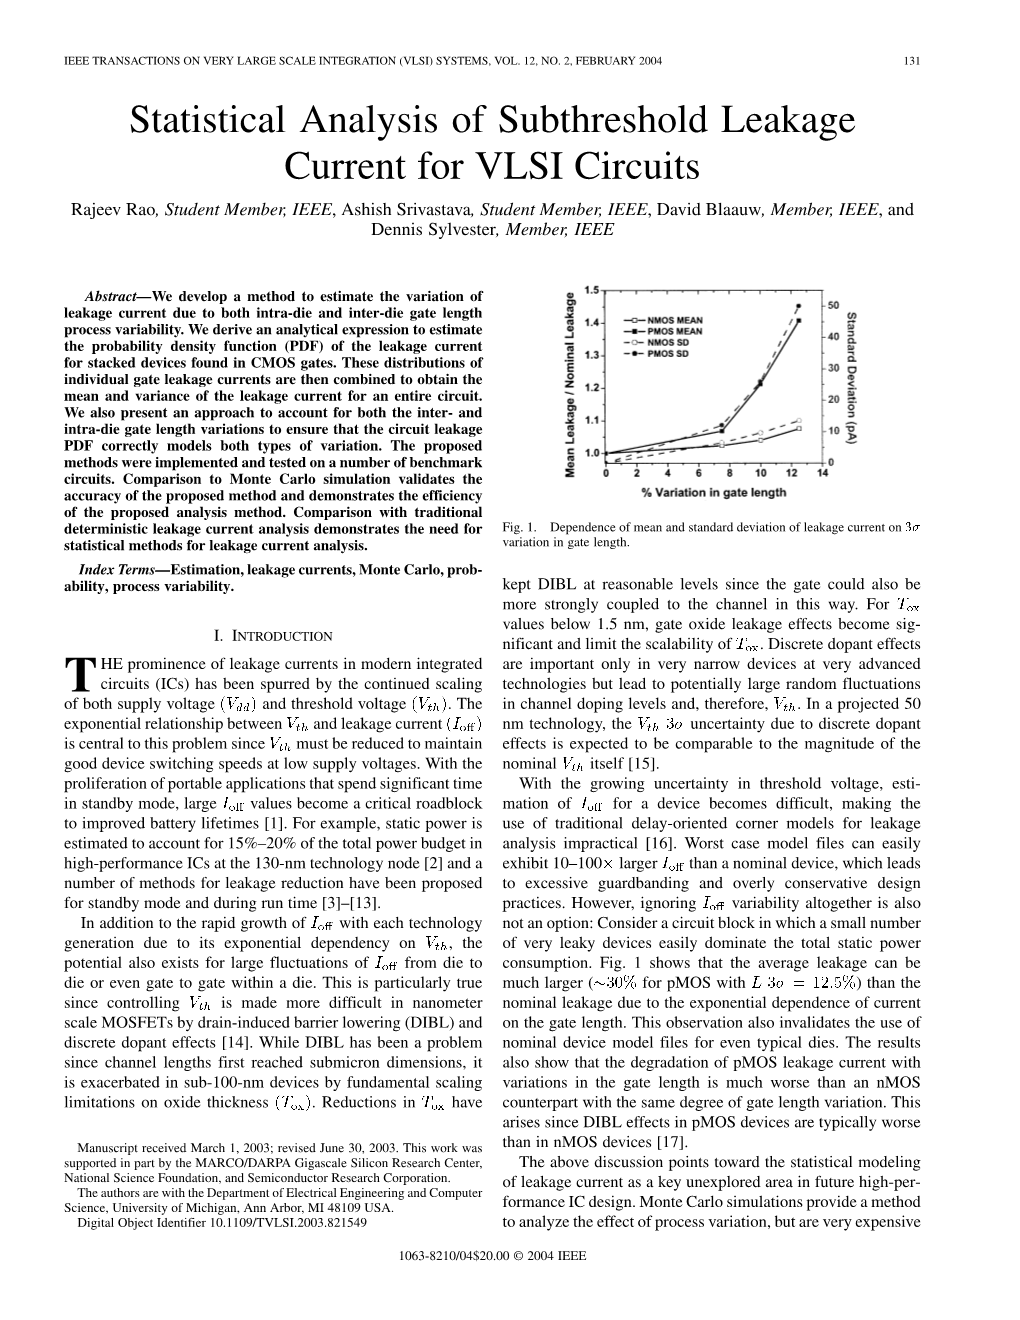 Statistical Analysis of Subthreshold Leakage Current for VLSI Circuits